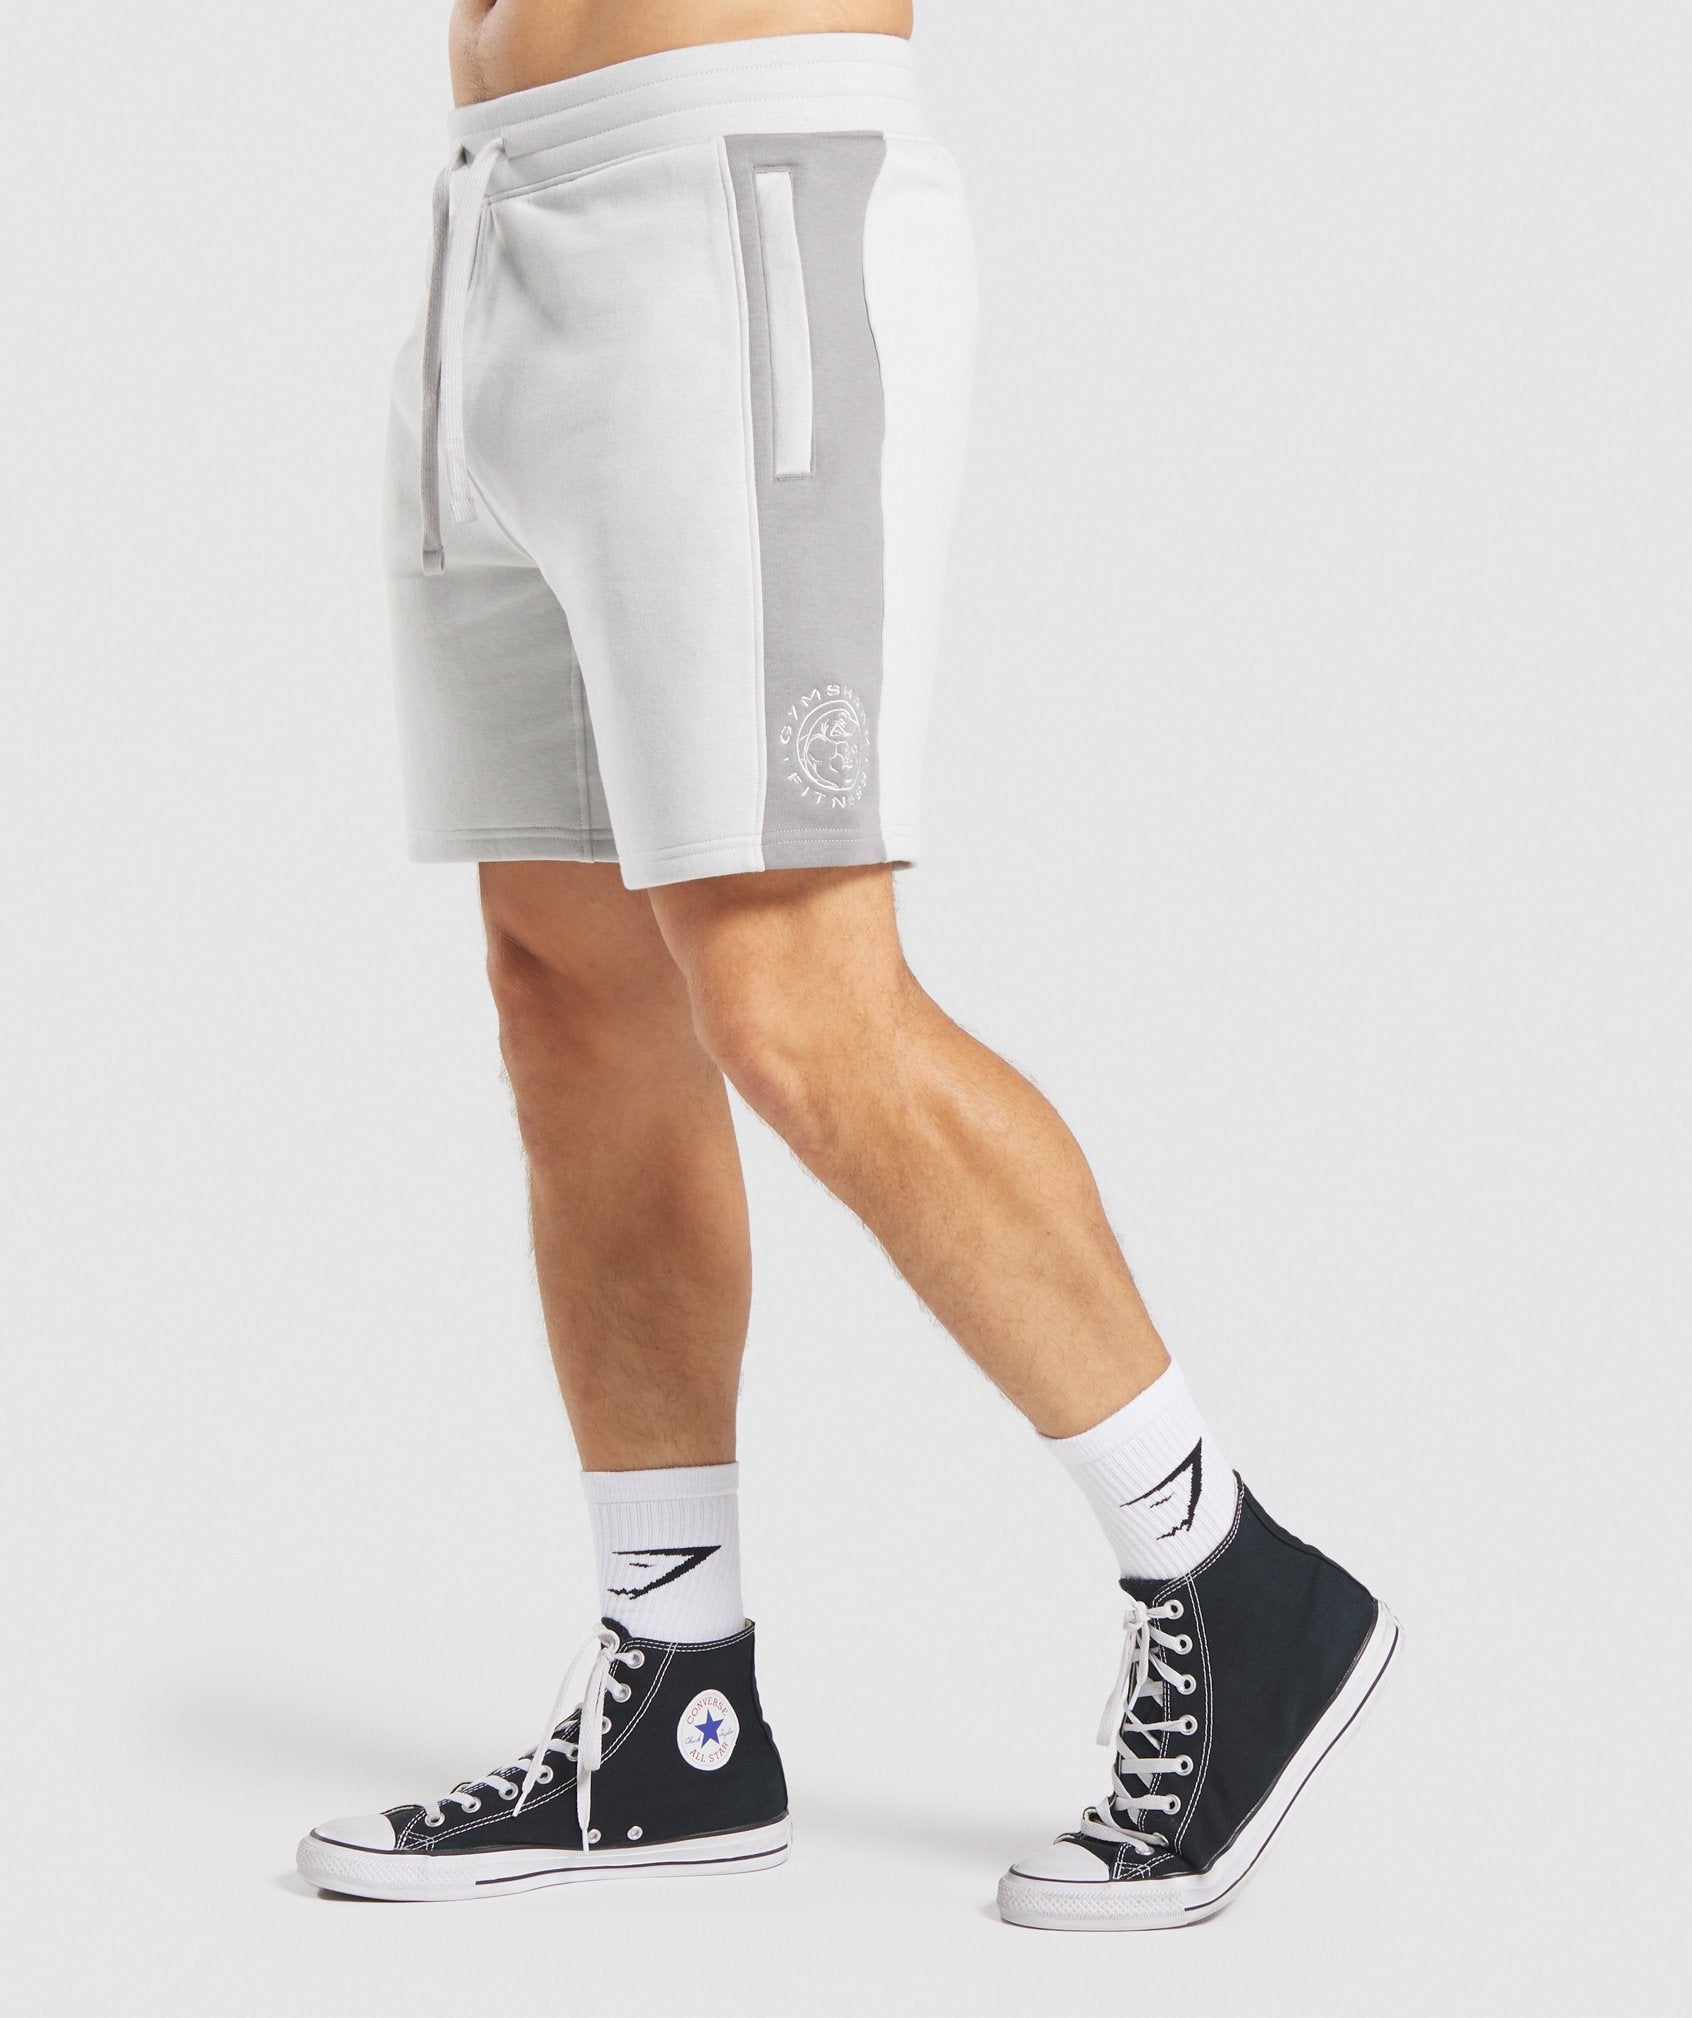 Luxe Legacy Shorts in Light Grey